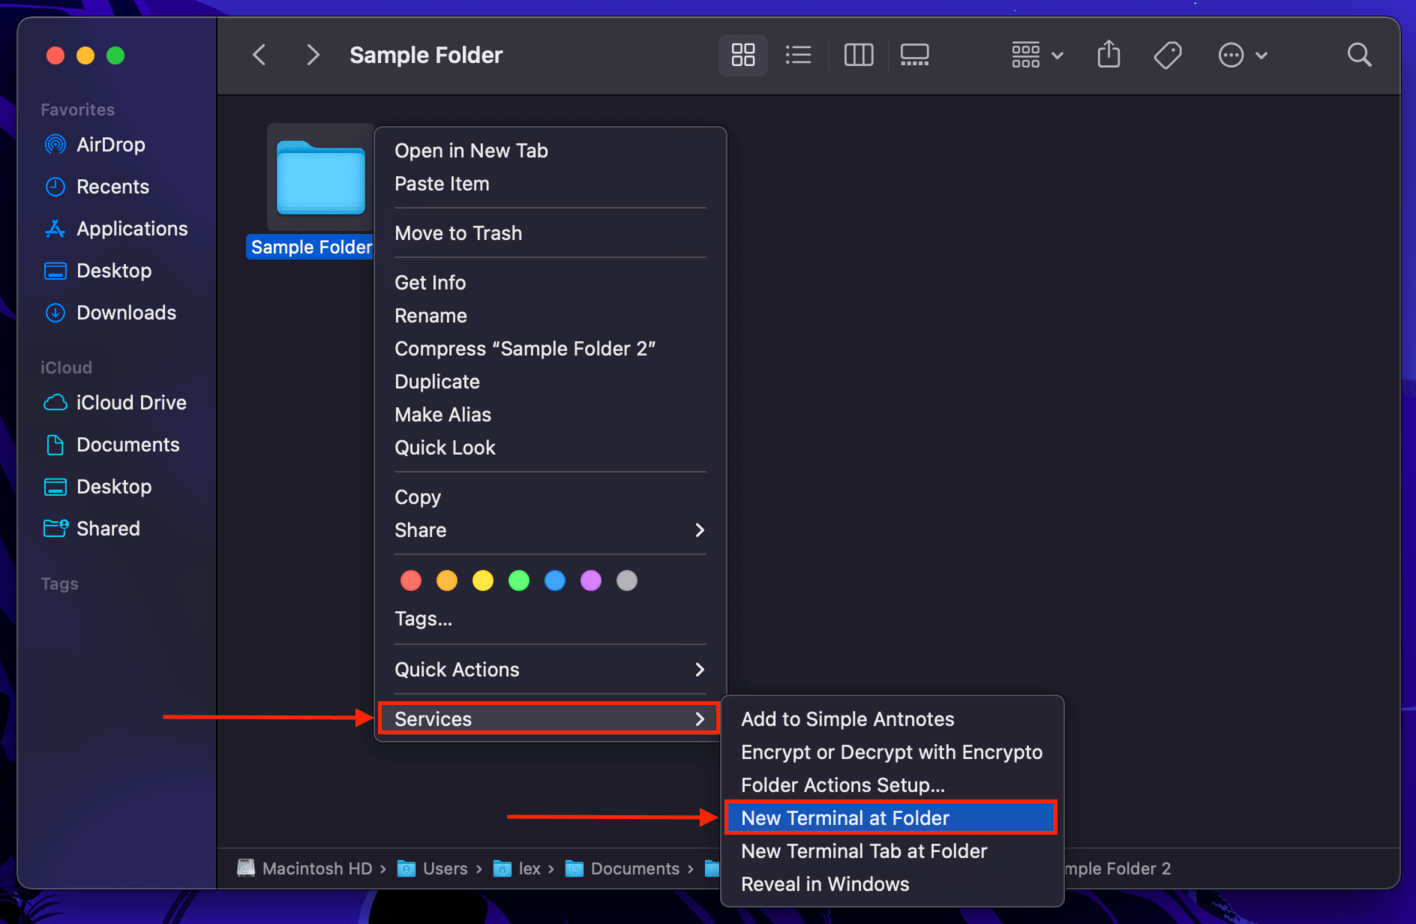 New Terminal at Window option on a Folder